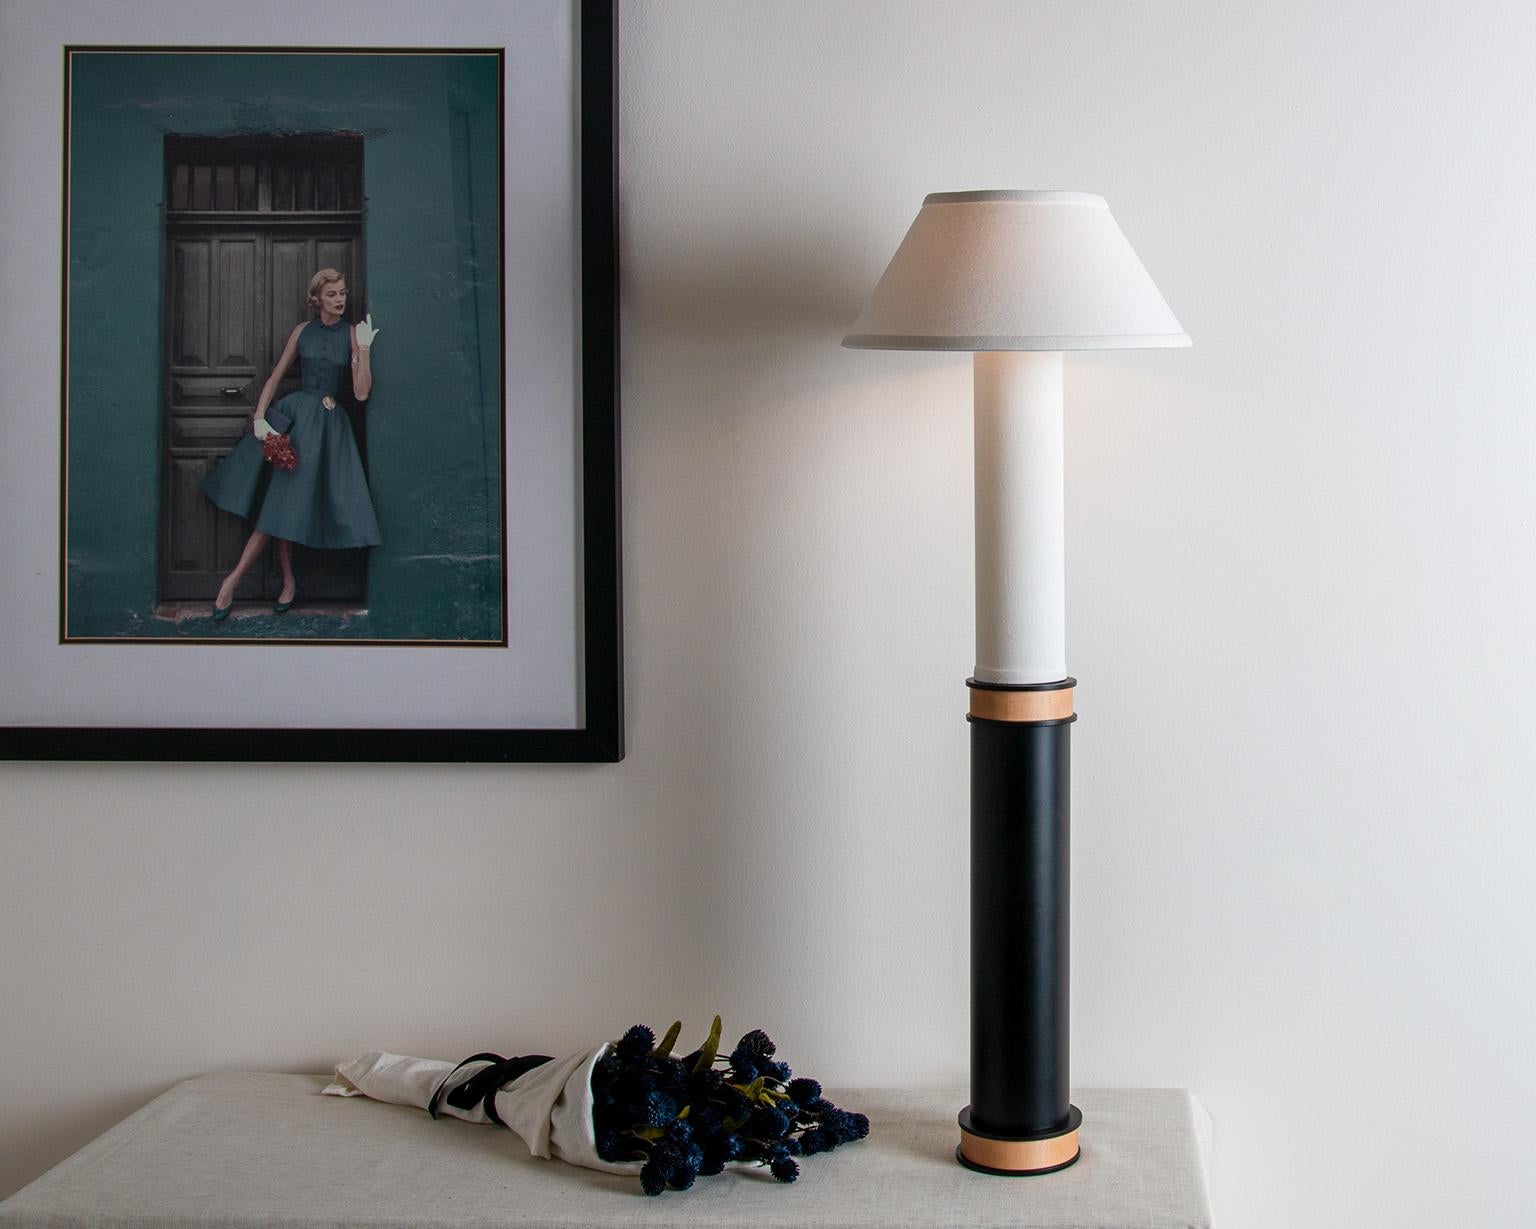 This stately lamp features a dramatic contrast of textures and materials. Almost 3 feet tall, the linen and steel column lamp has a presiding presence. Inspired by the 18th century Bouillotte lamp, this is our reinterpretation of the neoclassical